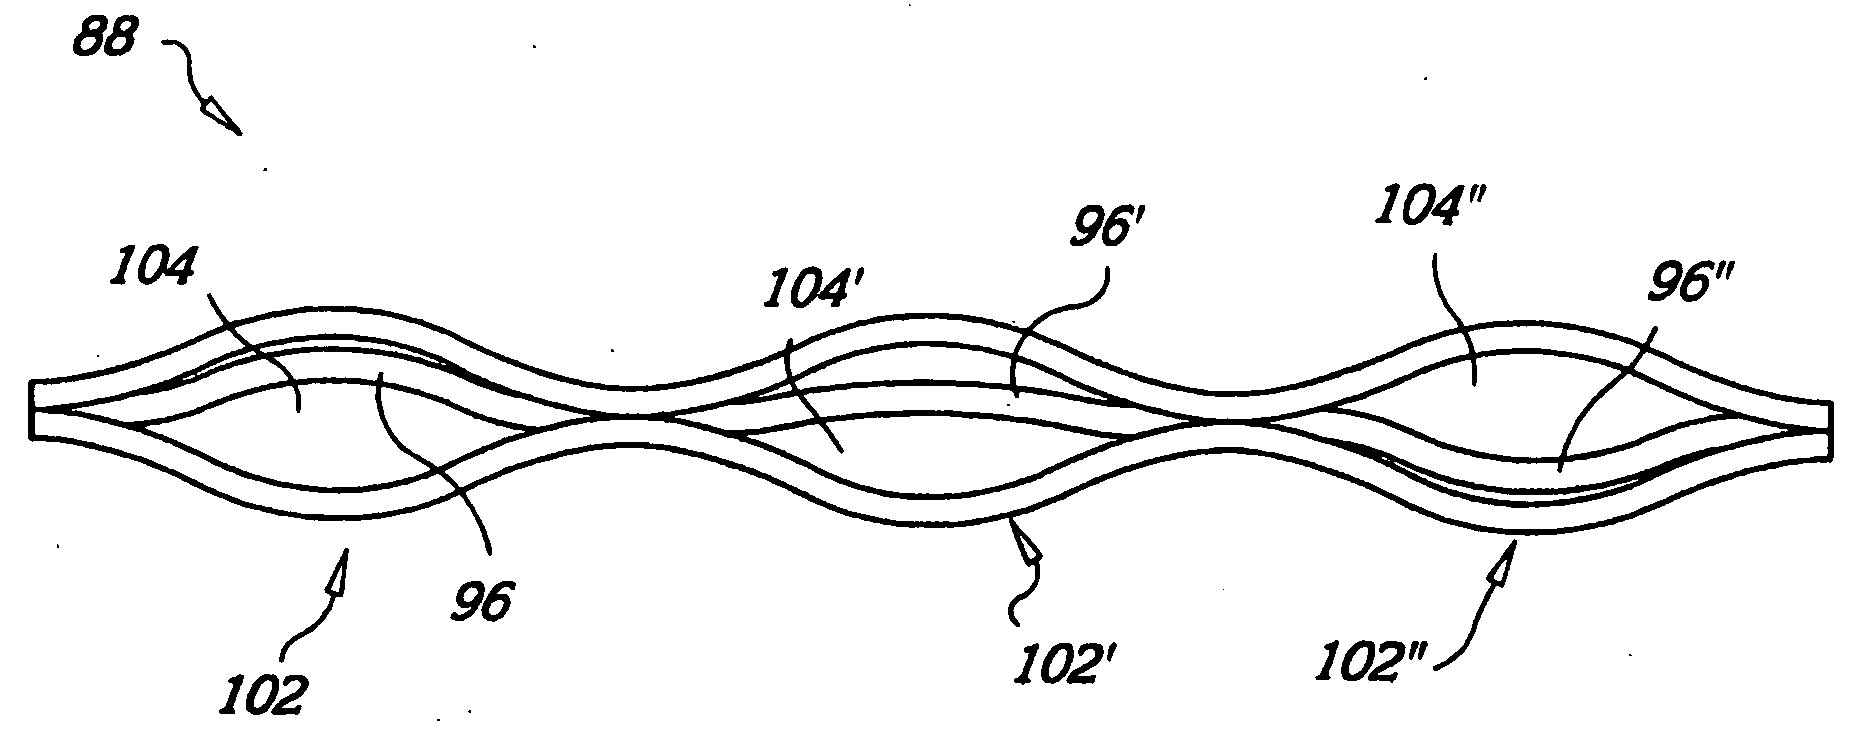 Radially expandable stents